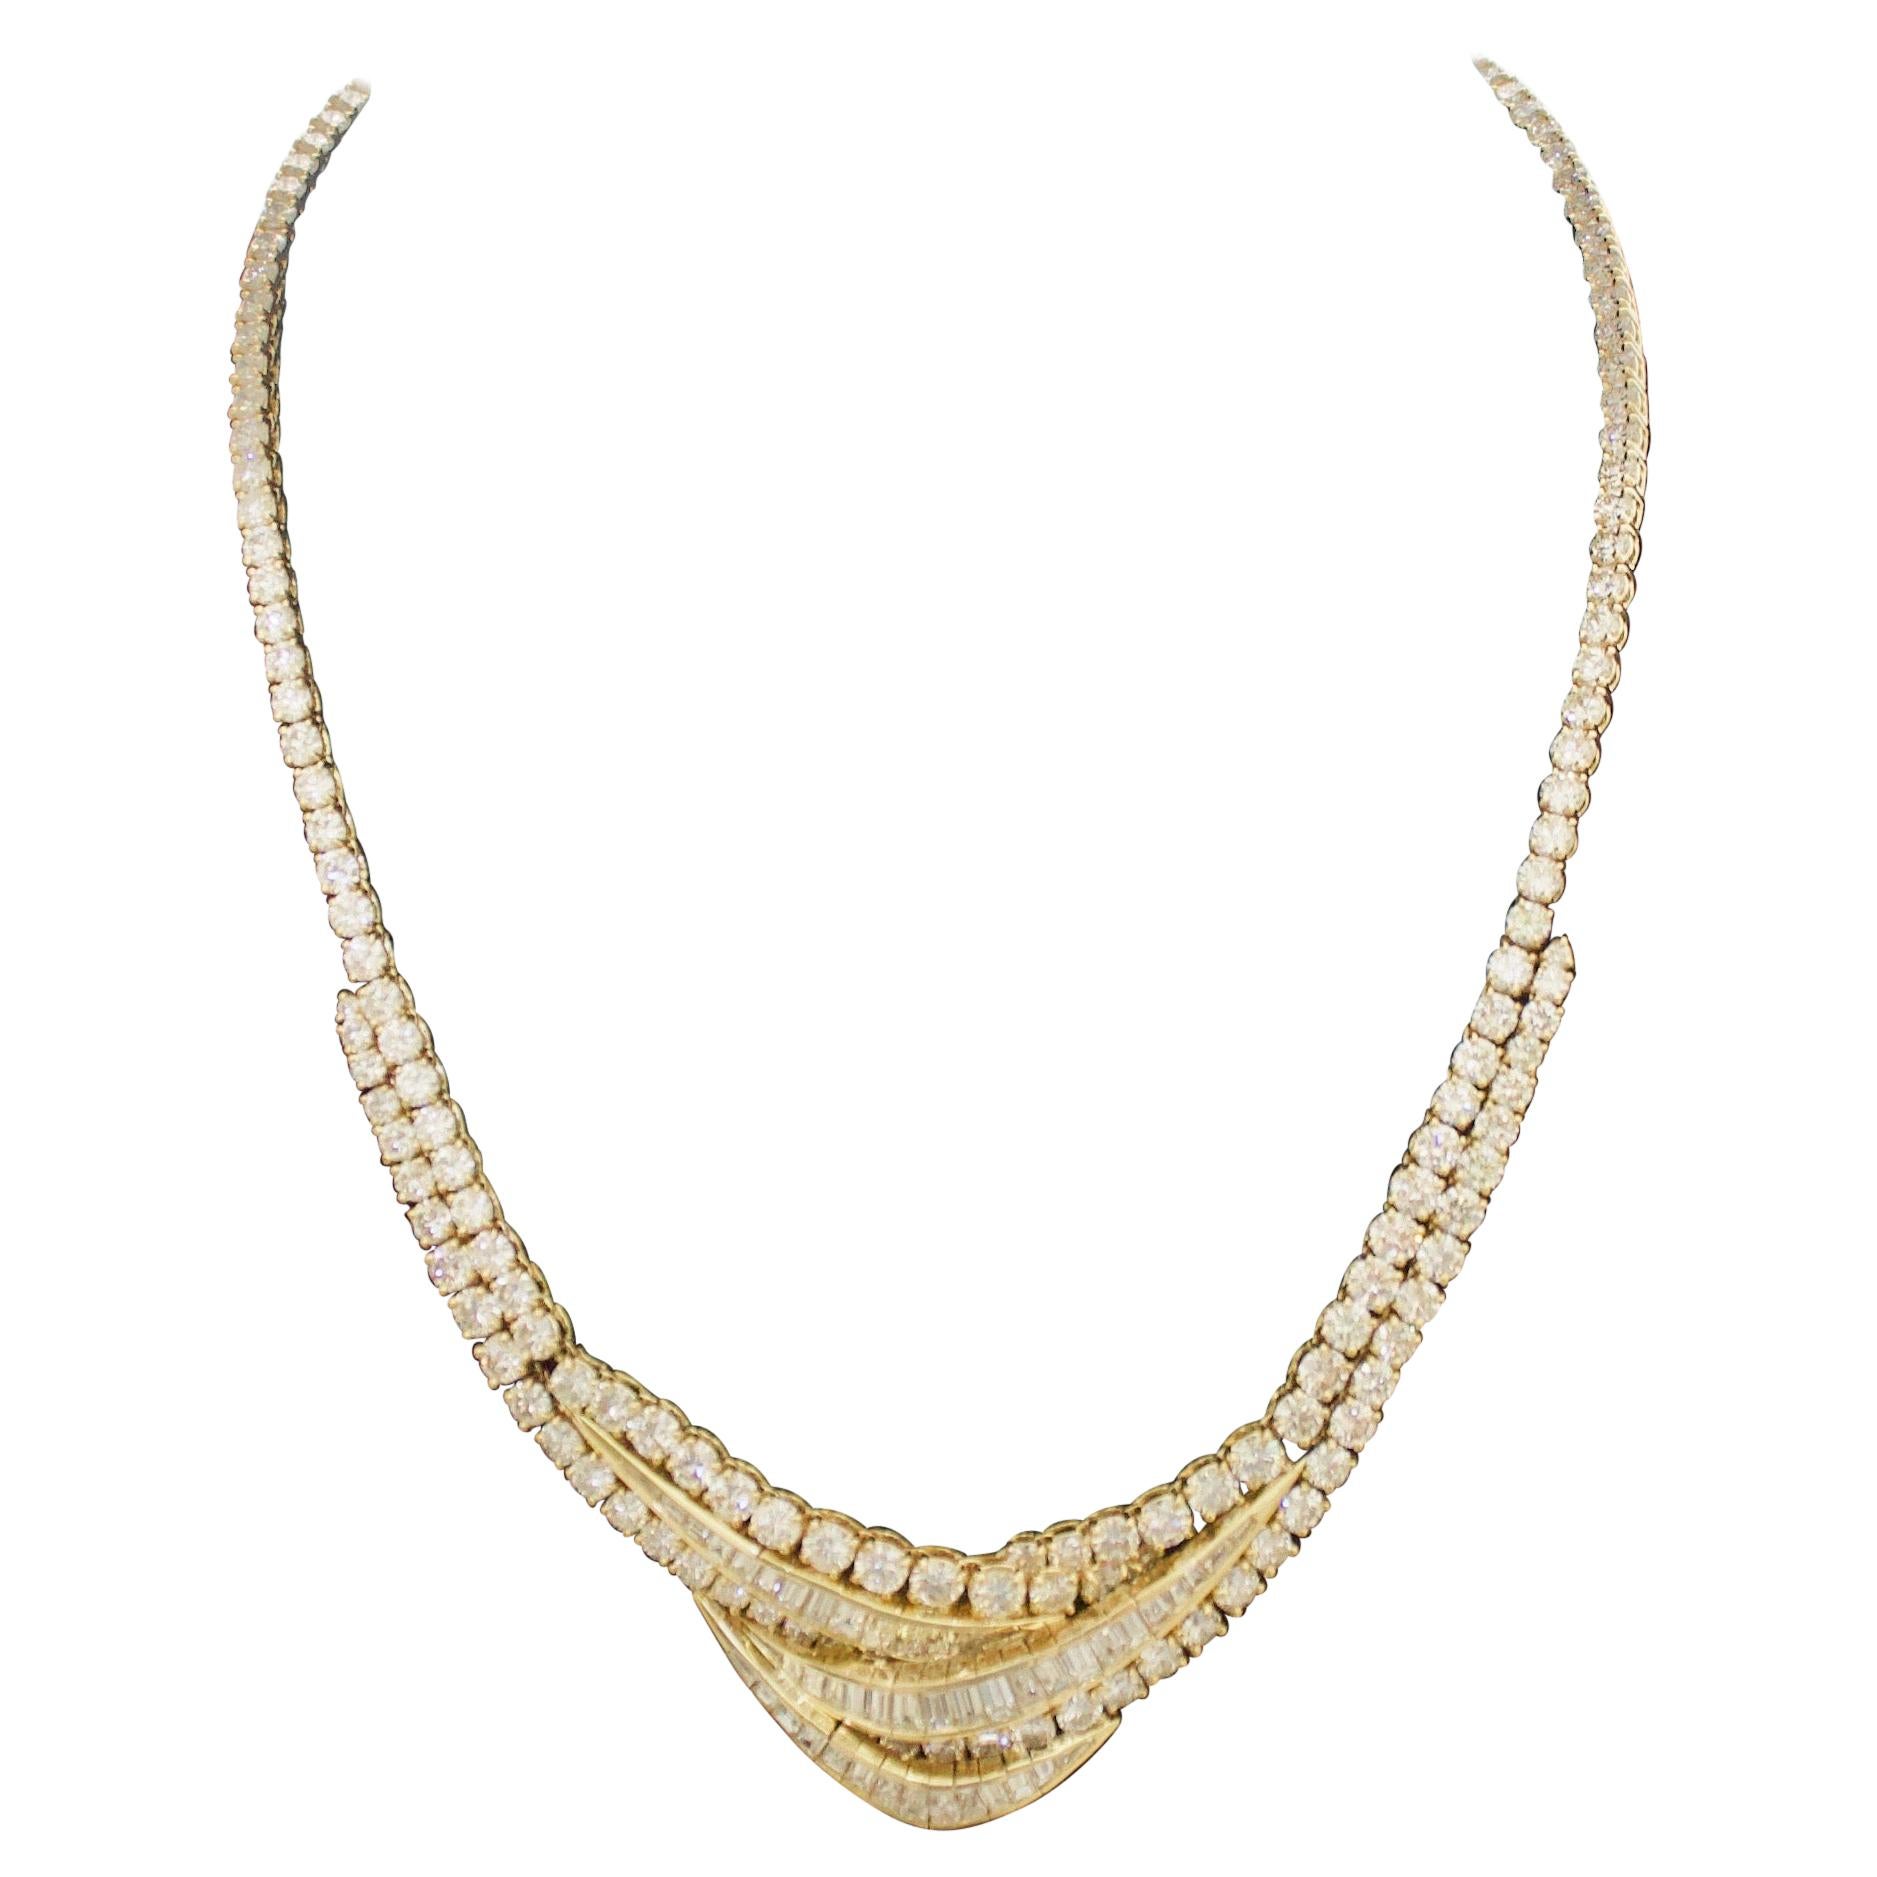 Important Diamond Necklace in 18k 28.41 Carats Total Weight